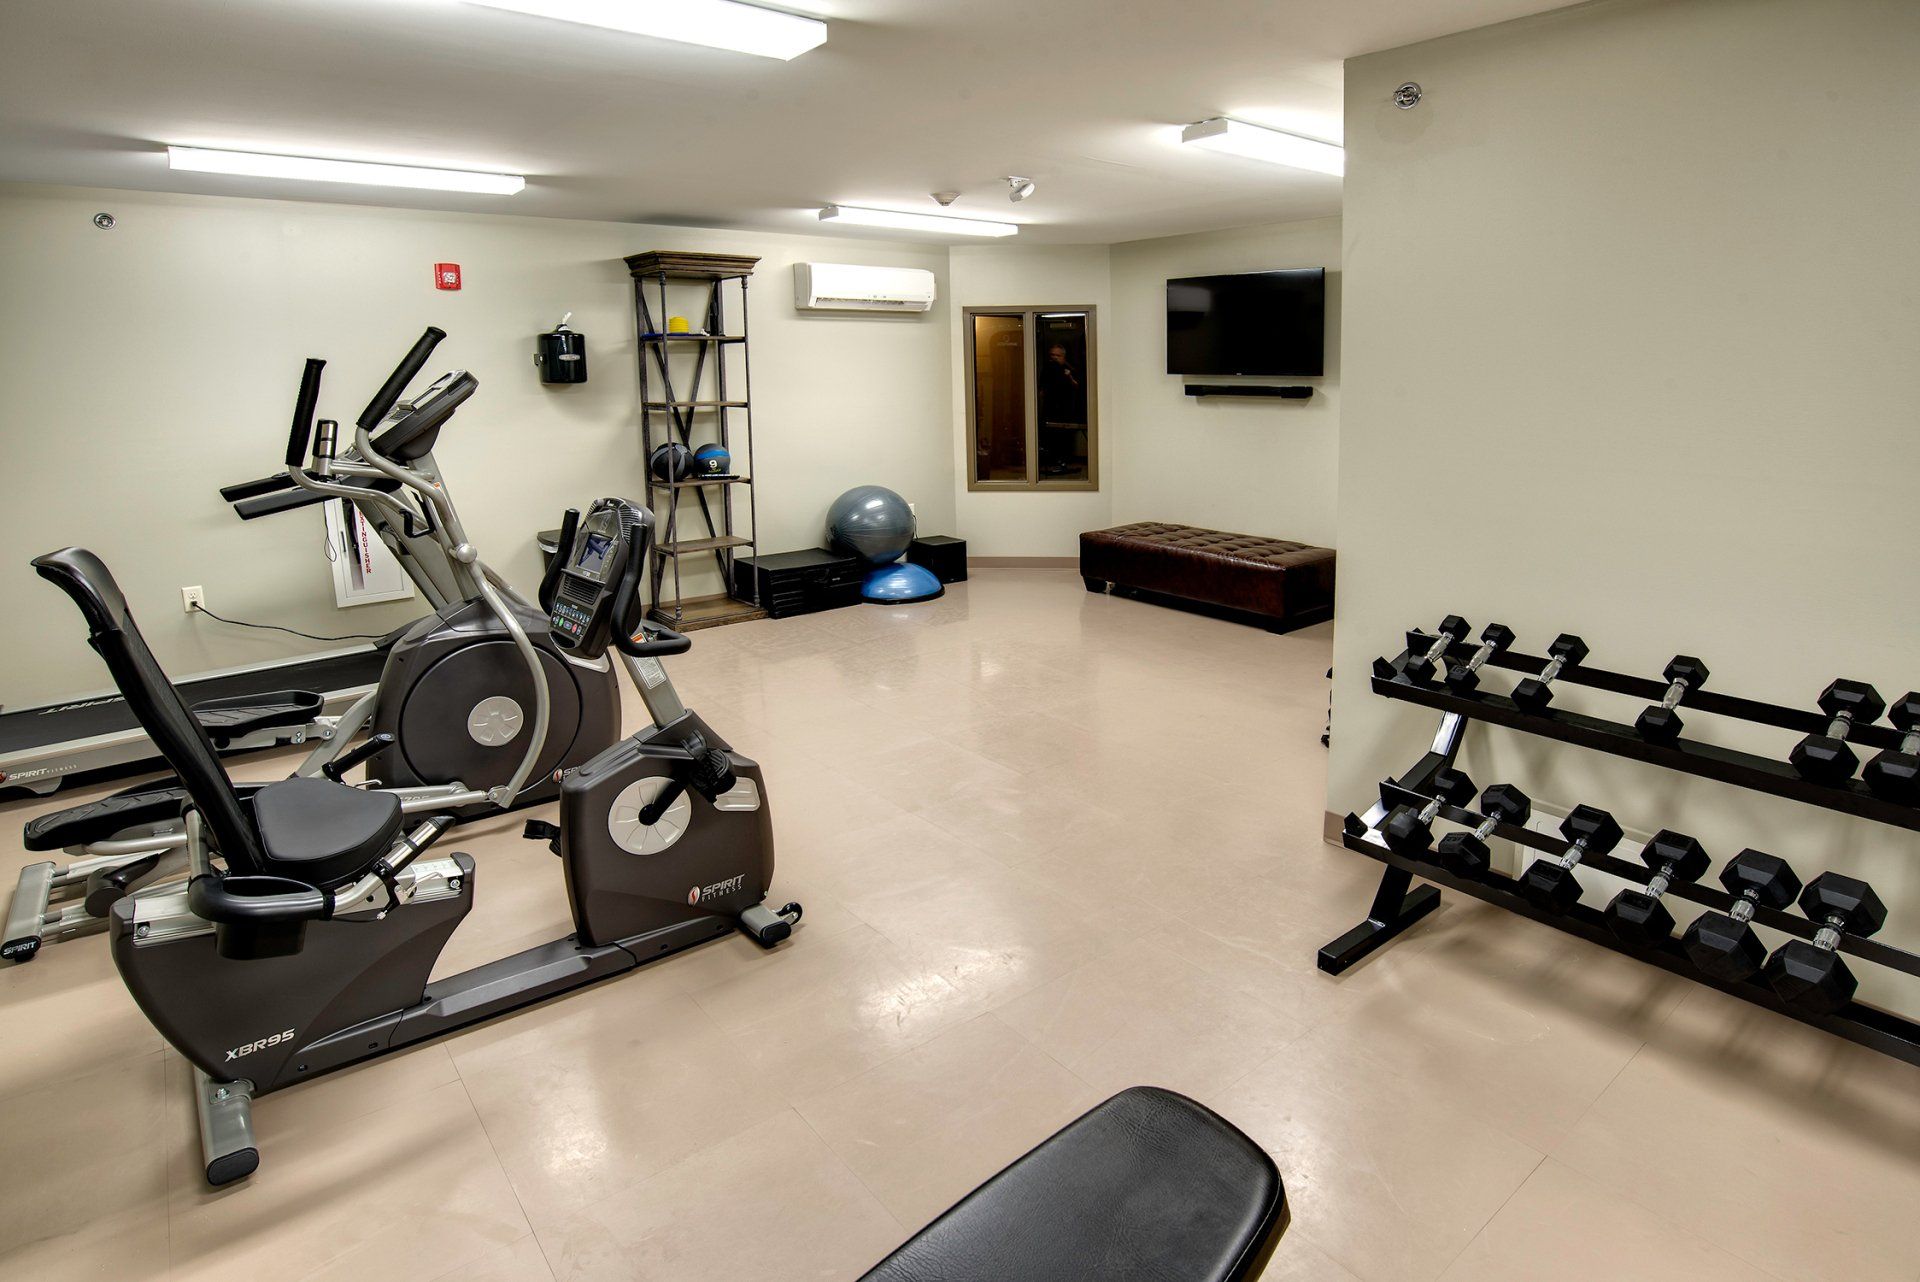 Exercise room 2